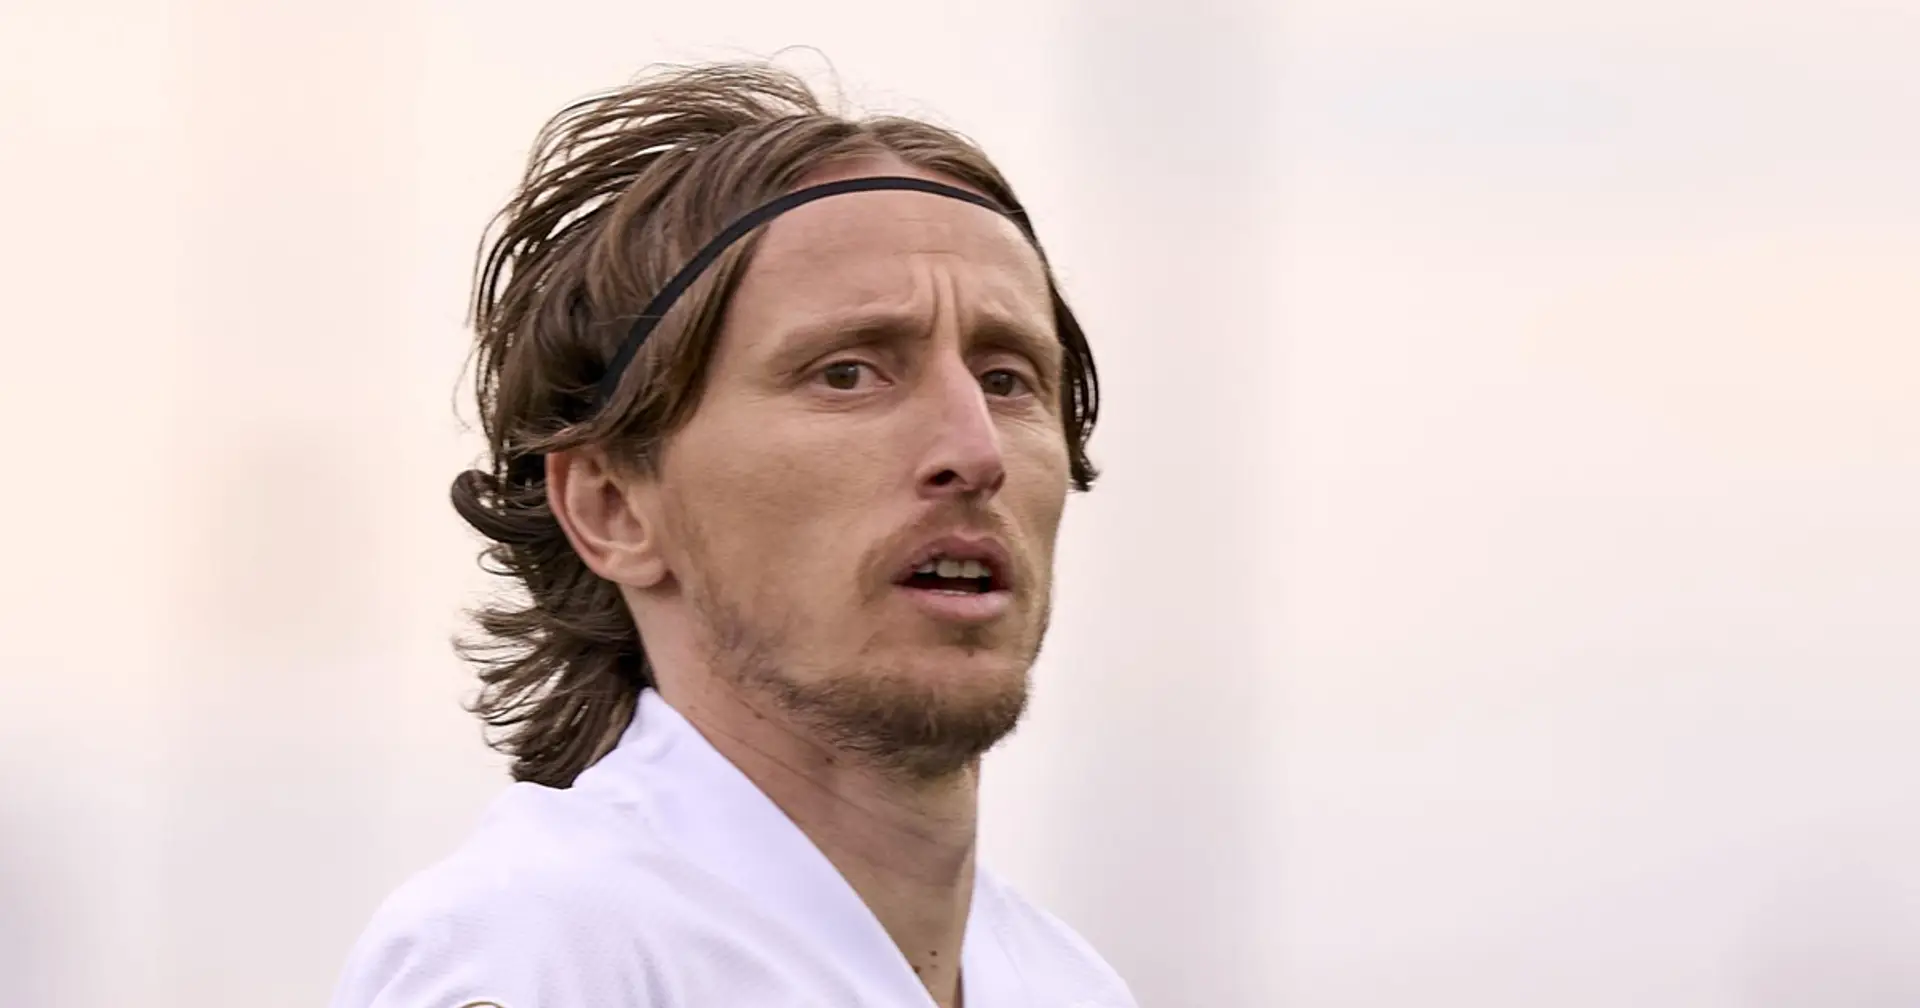 One crazy stat that shows Modric's exceptional durability